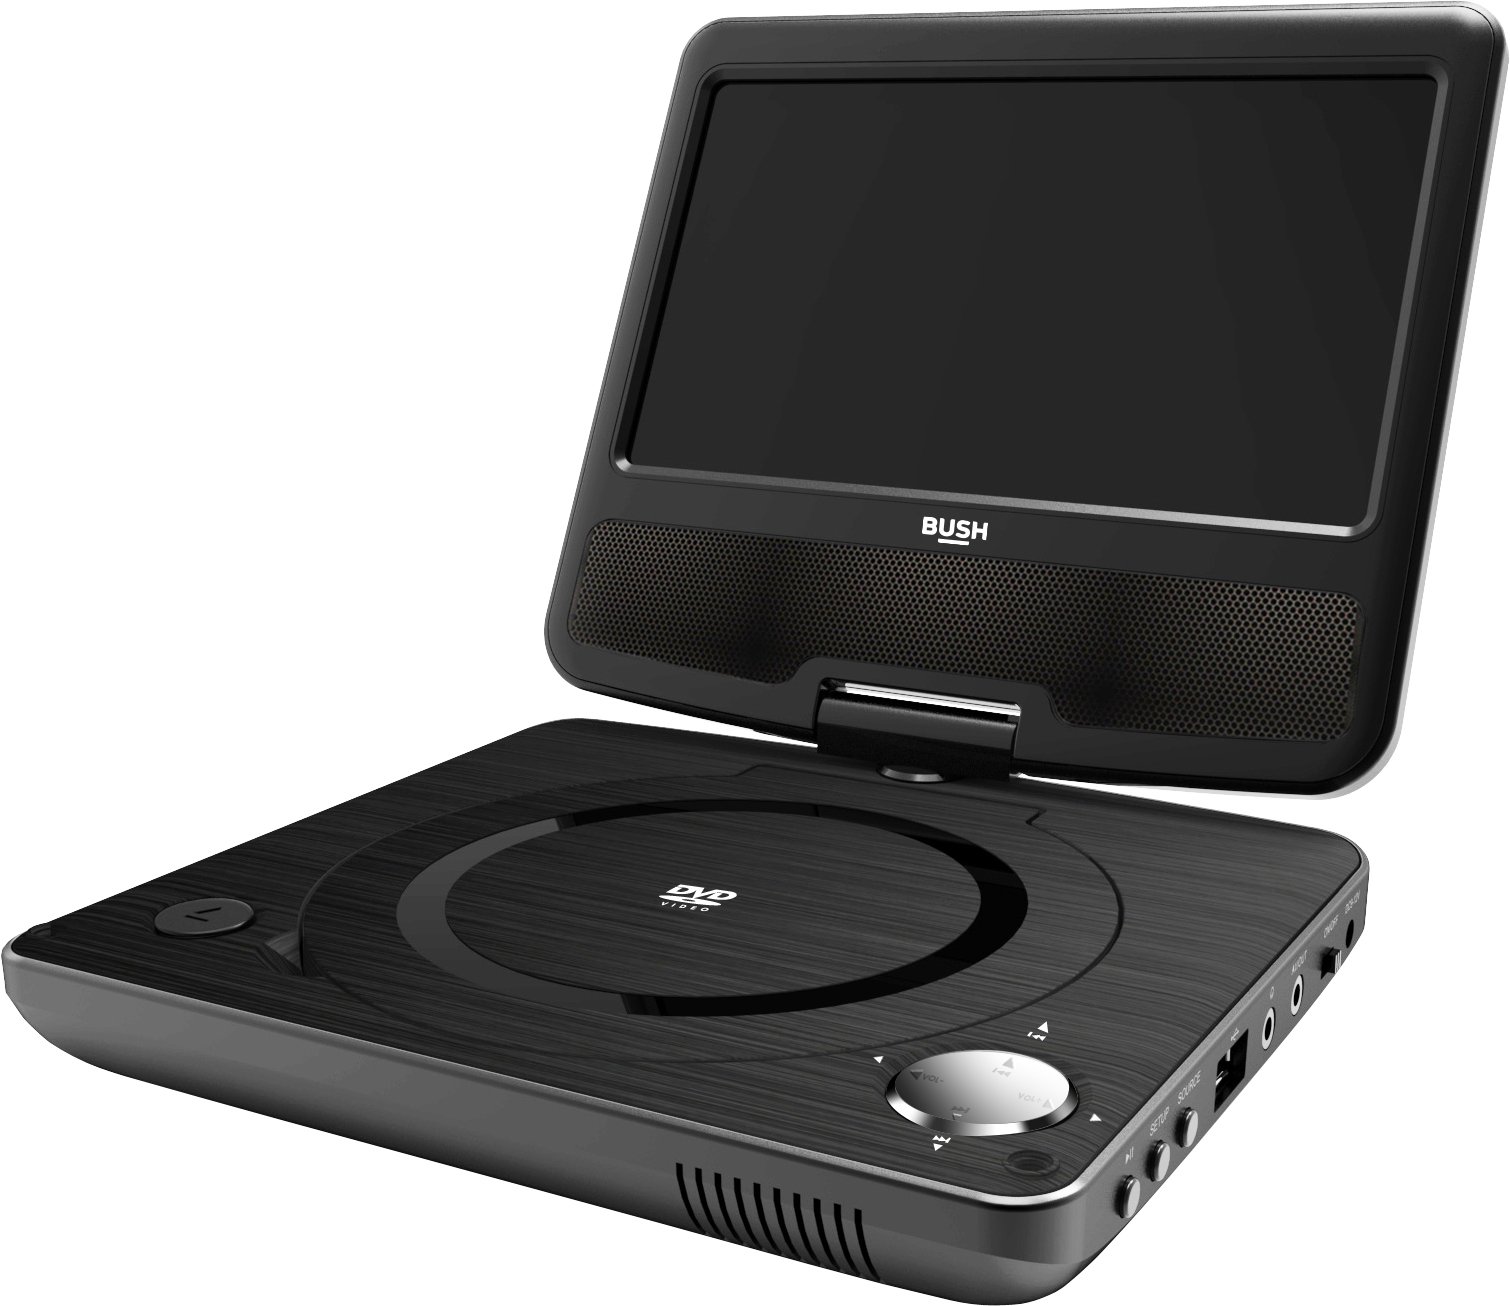 Buy Bush Inch Portable In Car DVD Player Black DVD and blu-ray  players Argos